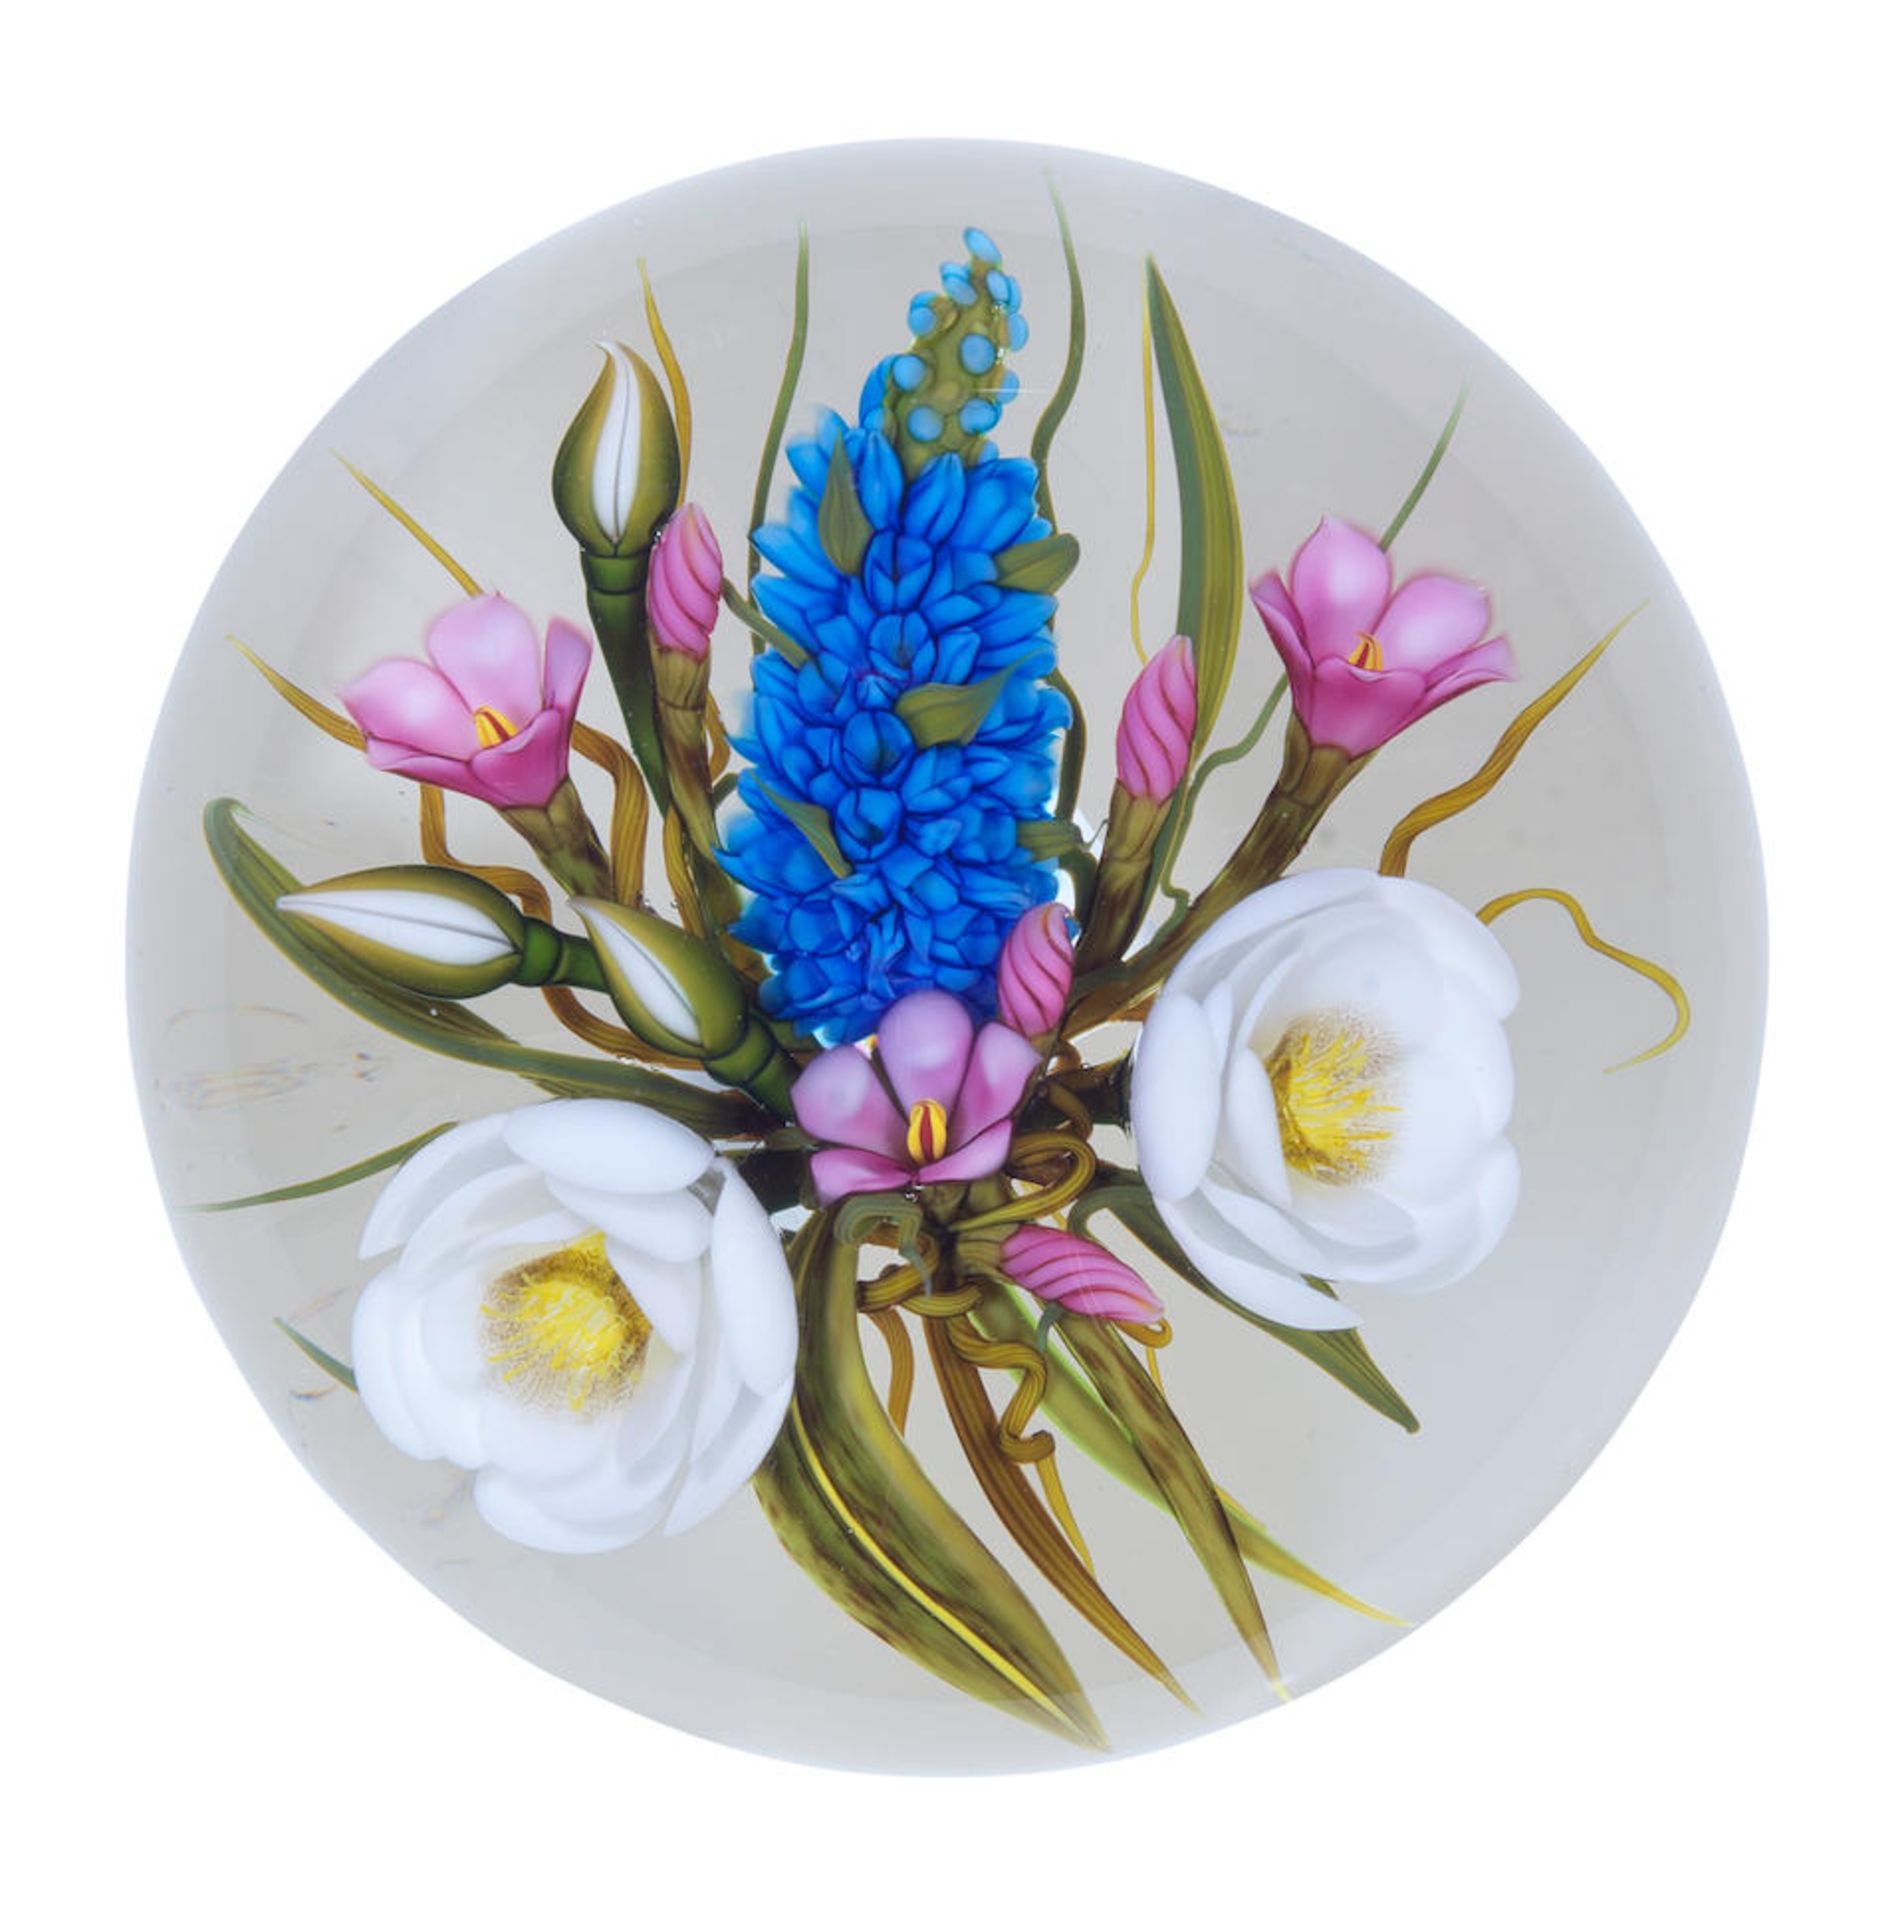 A Chris Buzzini floral bouquet magnum paperweight, dated 2007